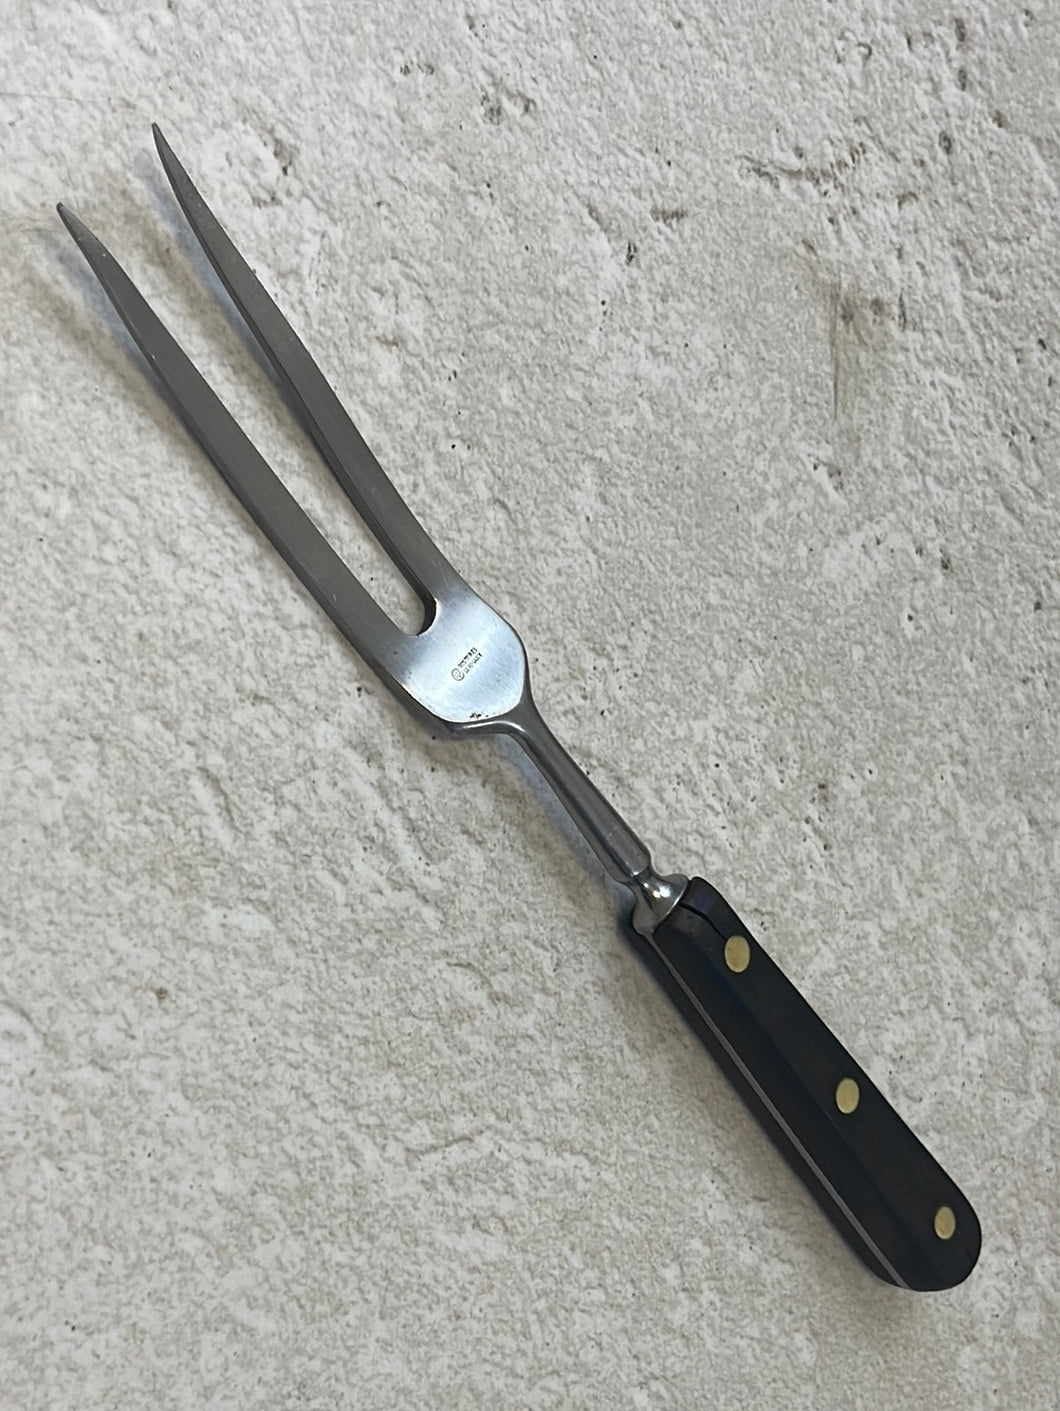 Vintage Wusthof curved Fork 150mm High Carbon Steel Made in Germany 🇩🇪 975